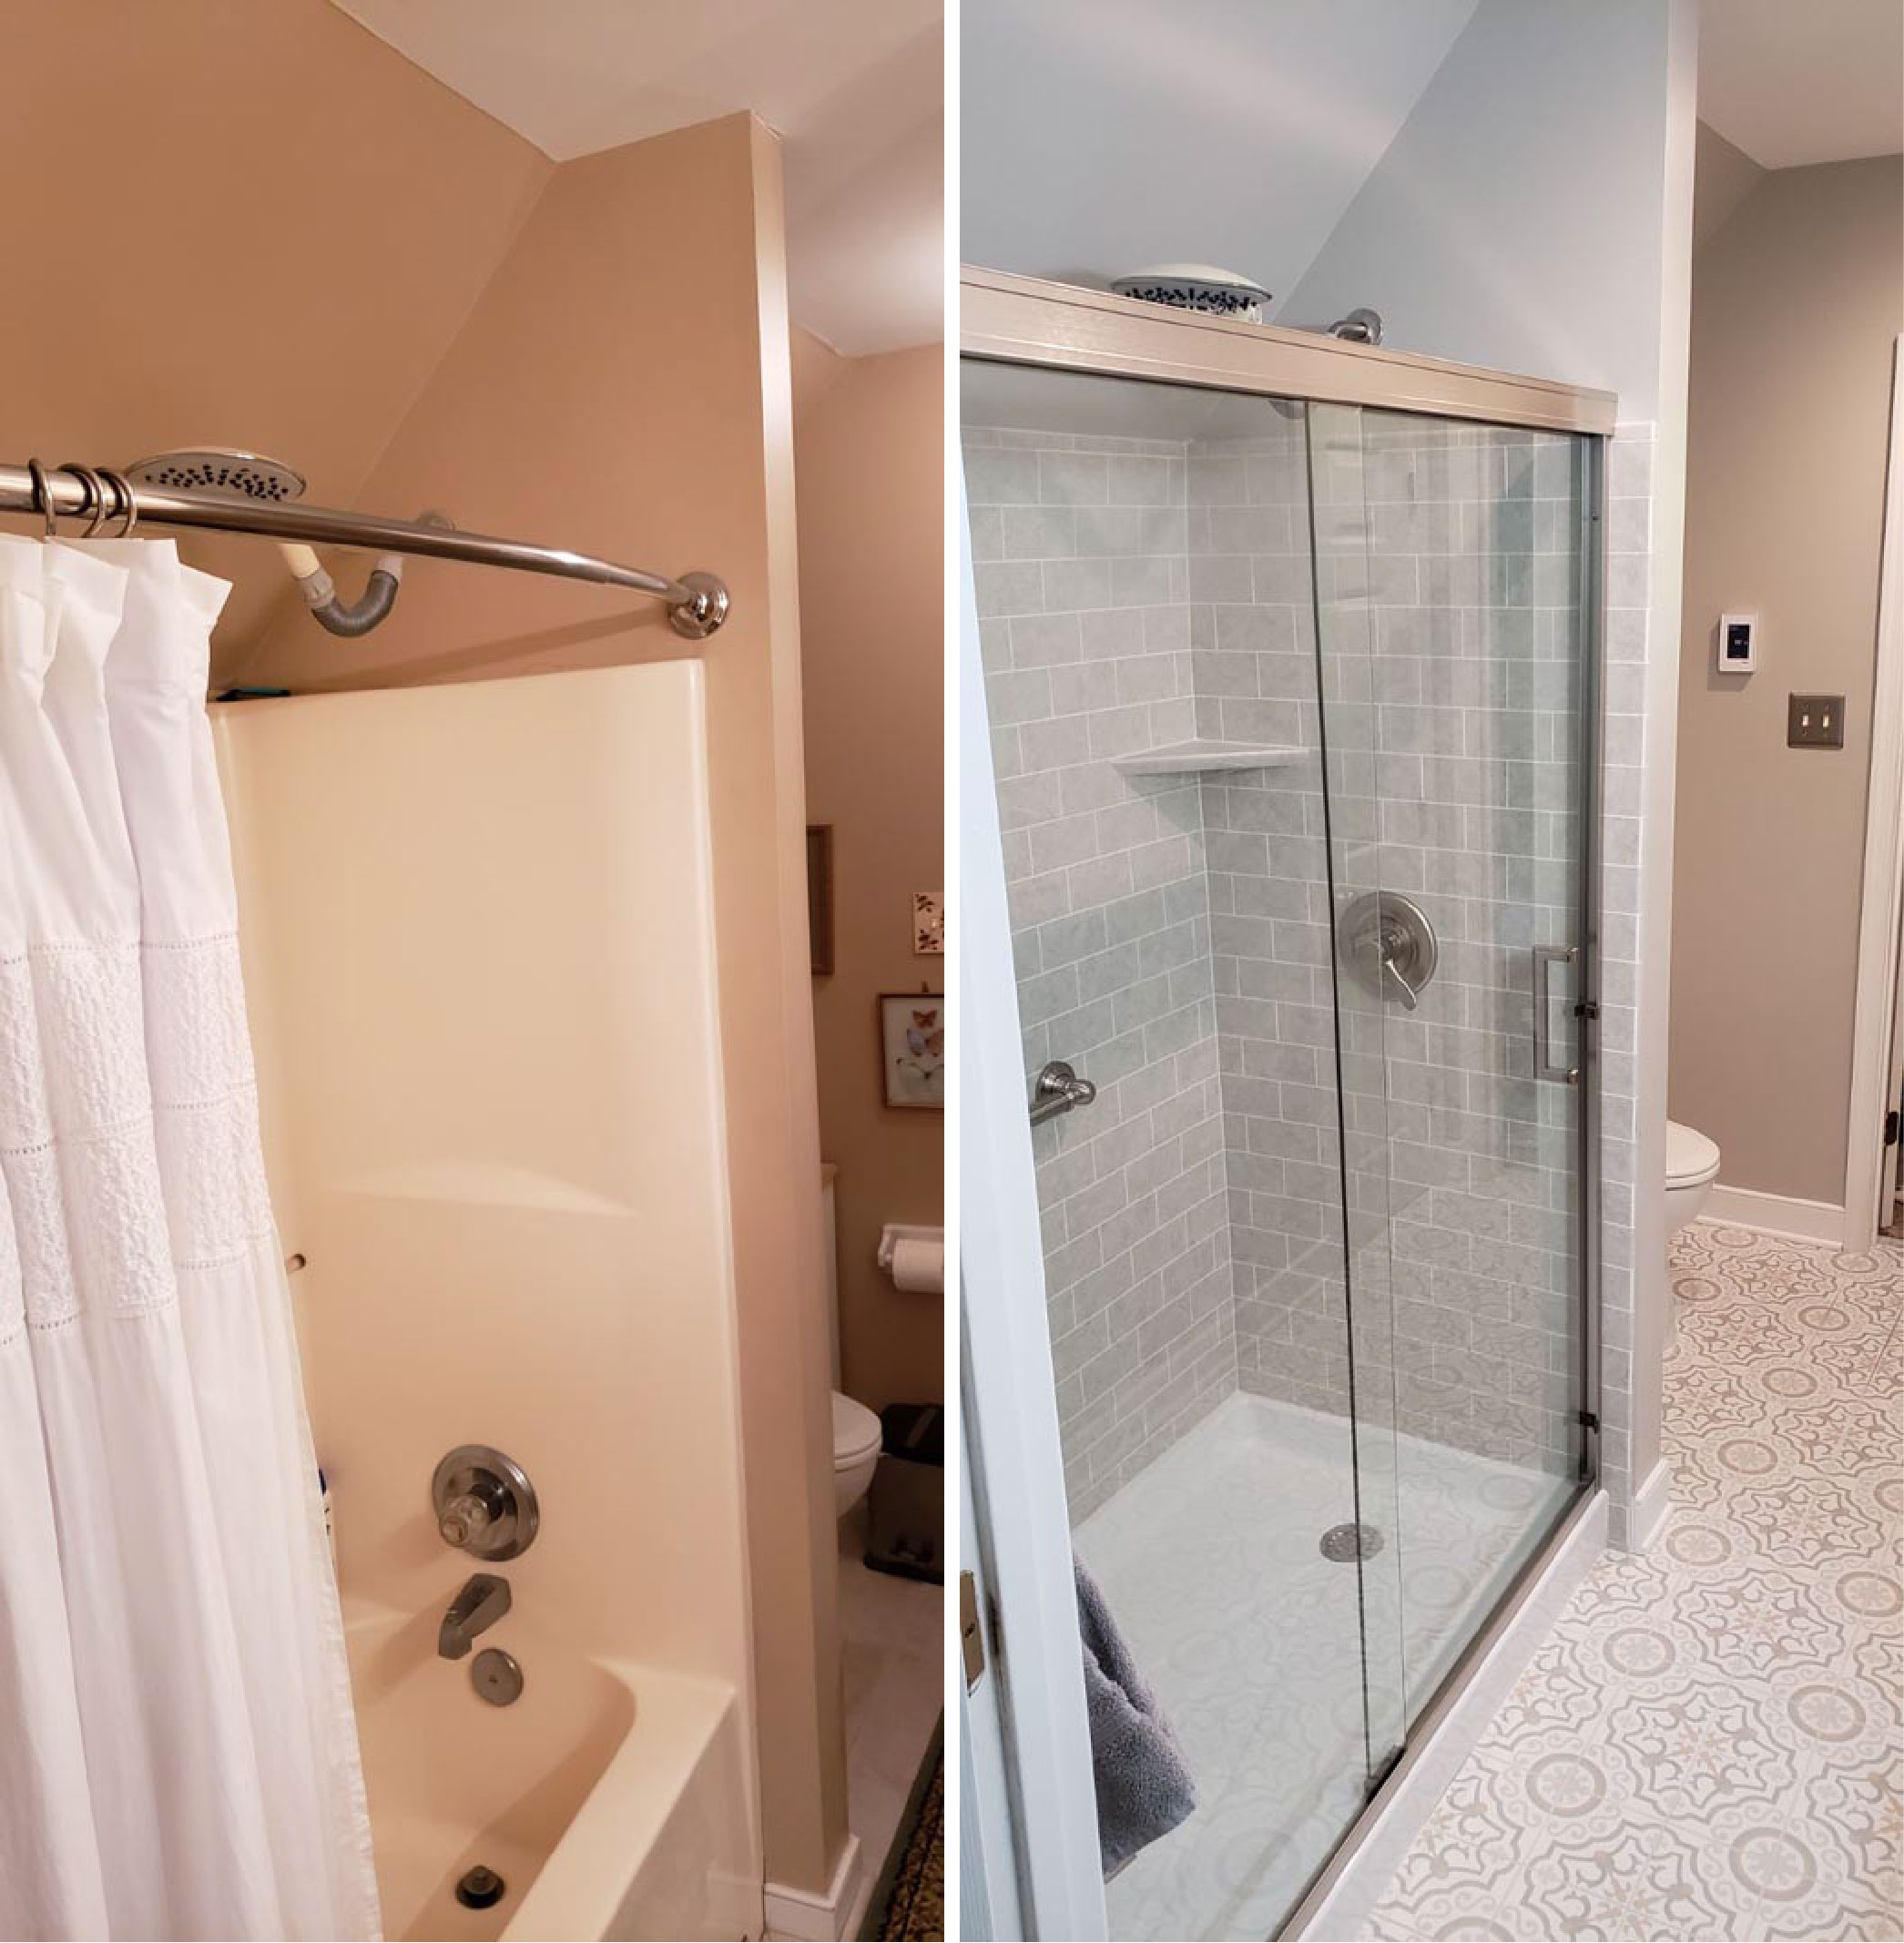 Costs Of Installing A Walk In Shower, Replace Shower With Bathtub Cost